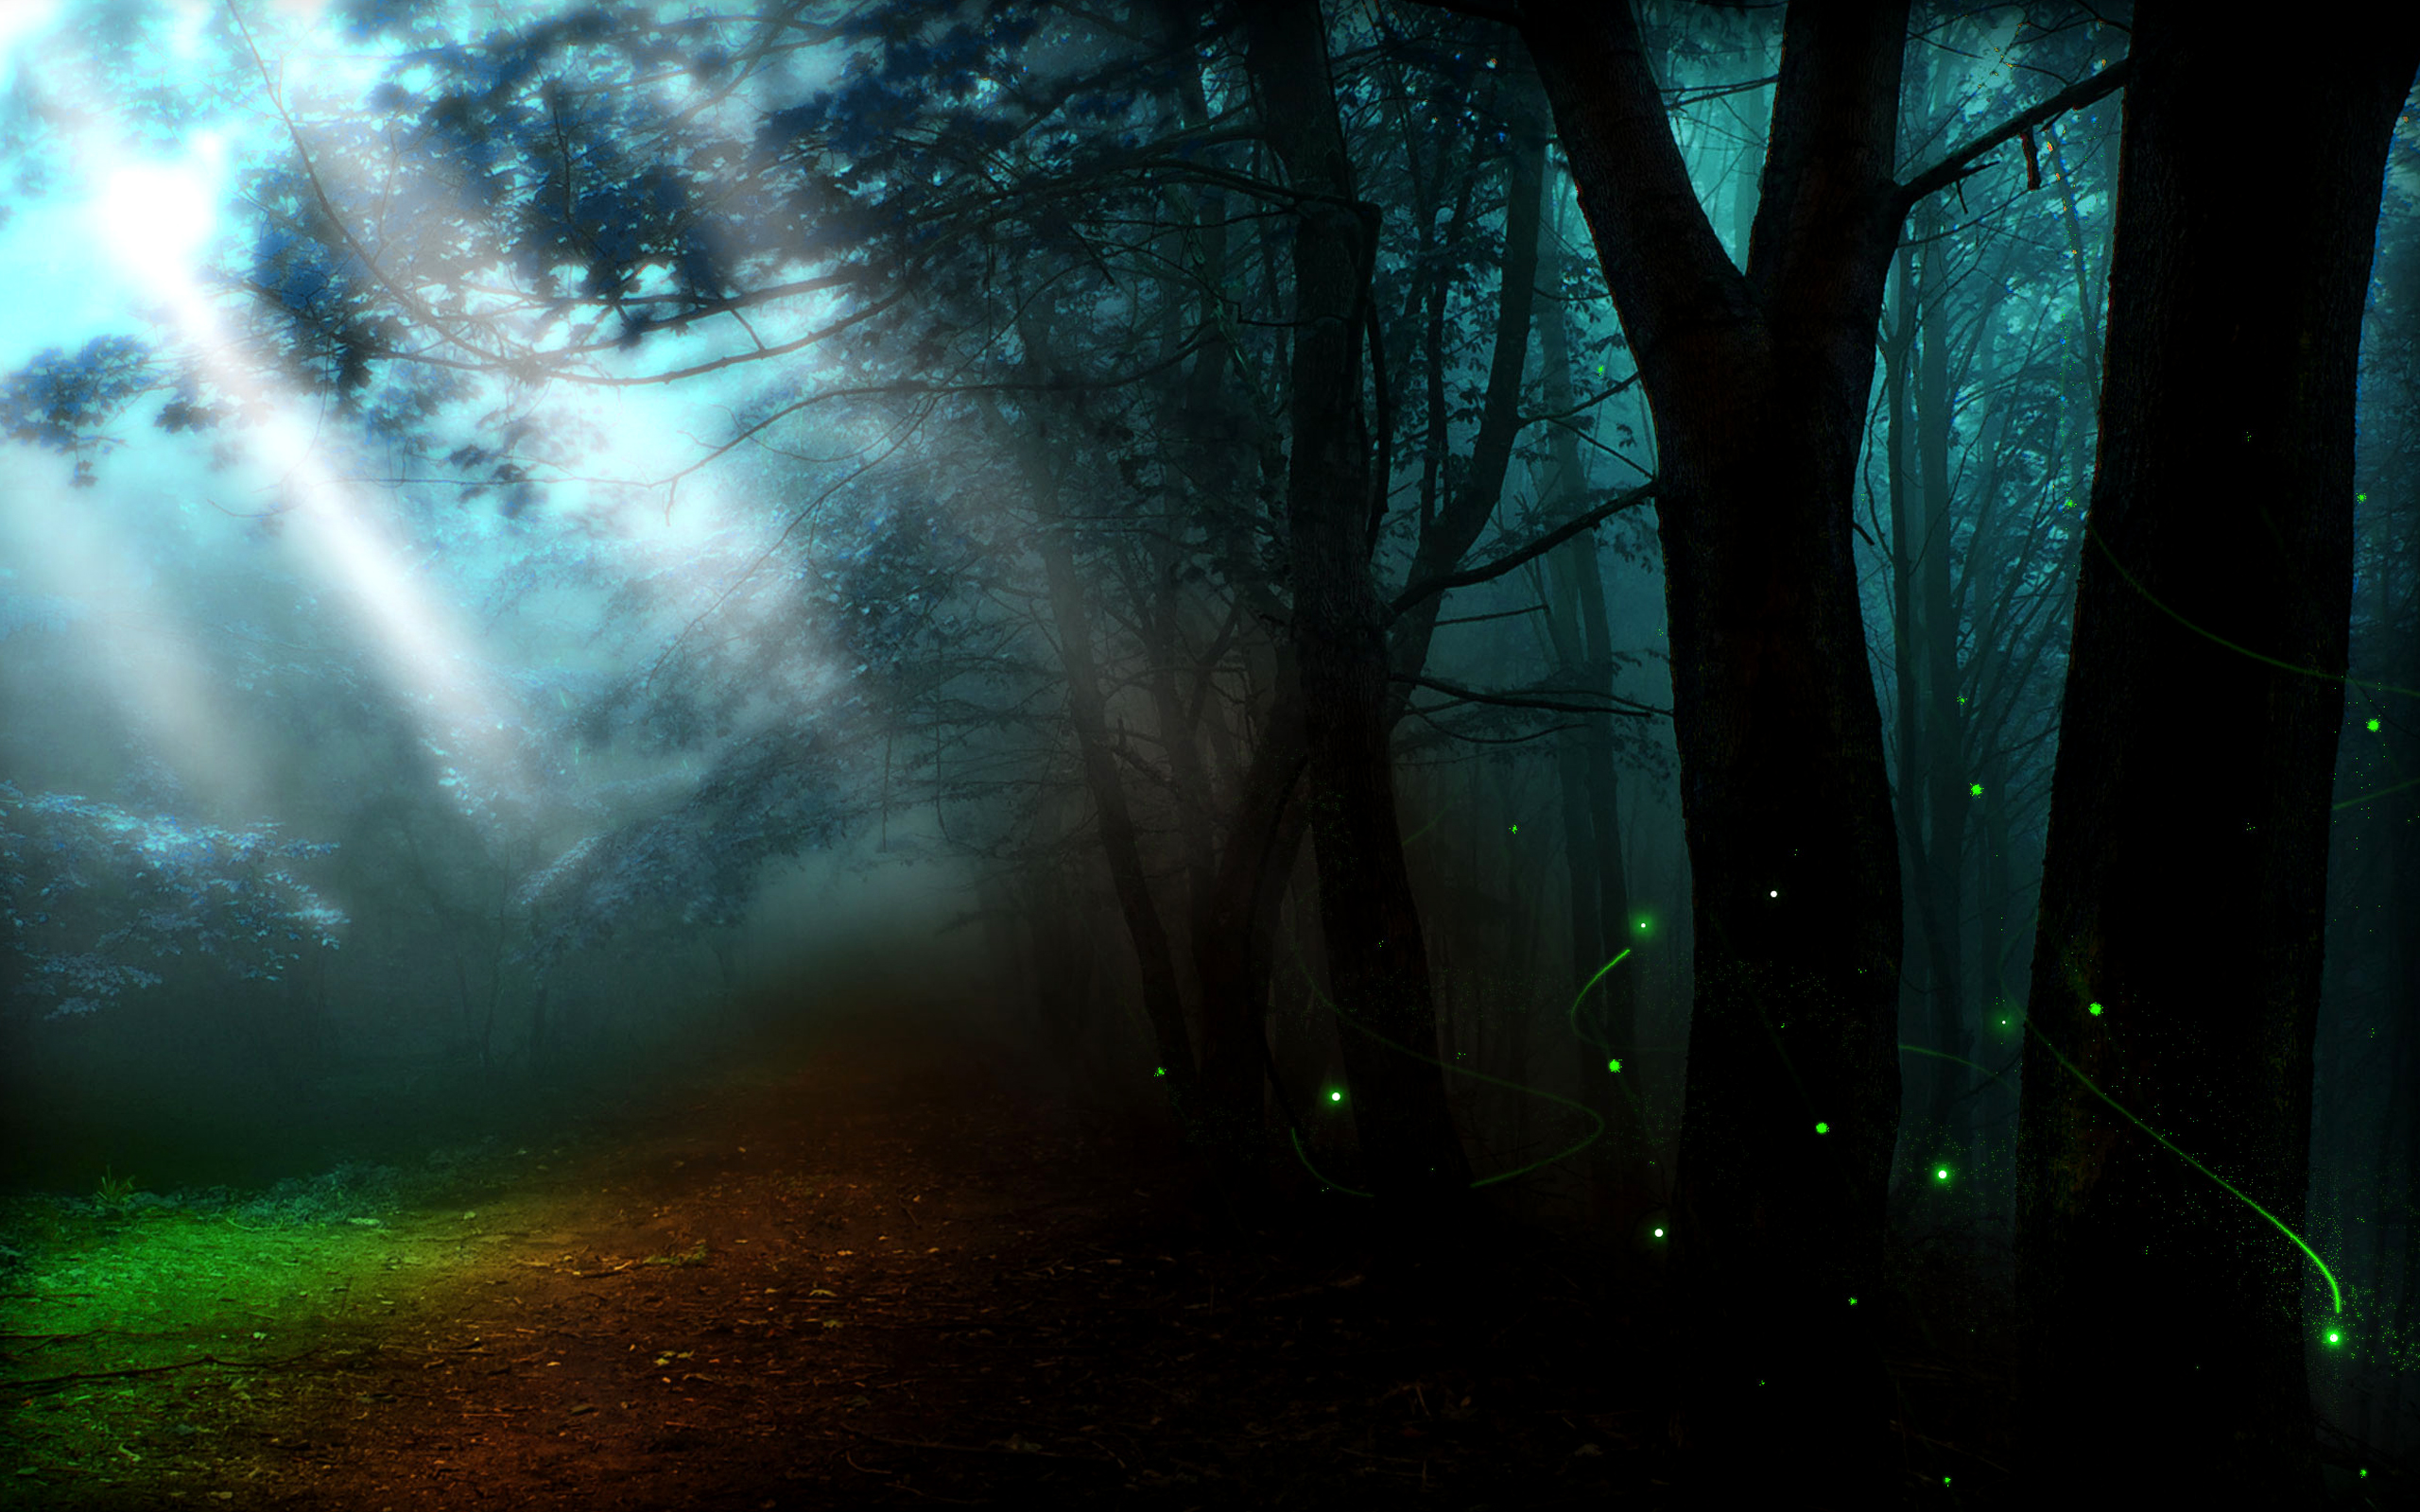 Artistic desktop wallpaper: Fae Woods. A picturesque forest bathed in sunshine, adorned with fireflies.